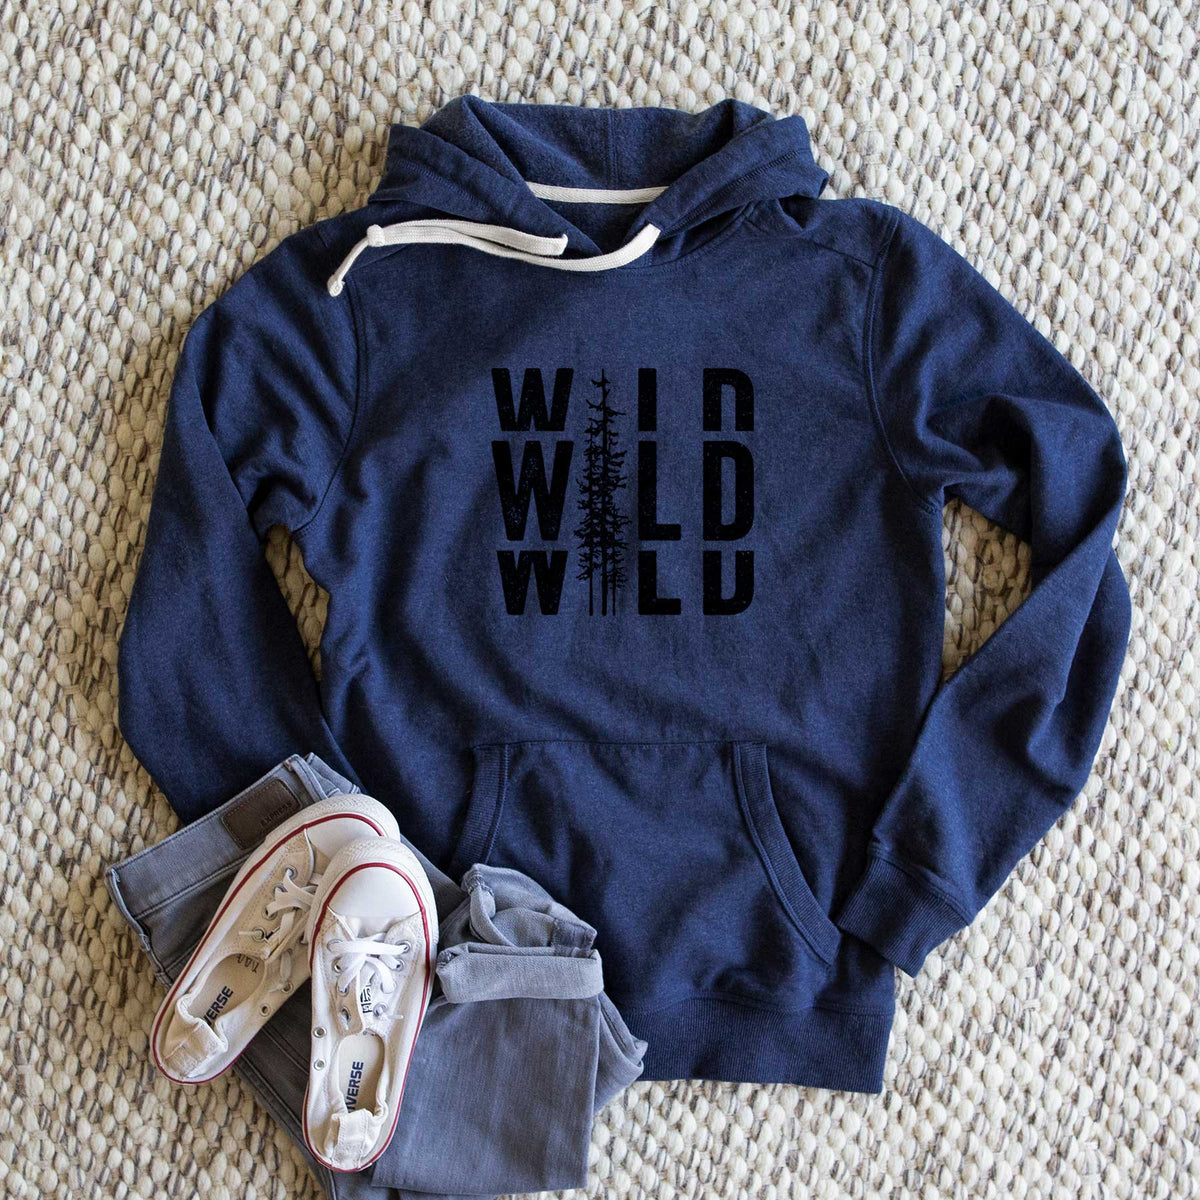 Wild - Unisex Recycled Hoodie - CLOSEOUT - FINAL SALE